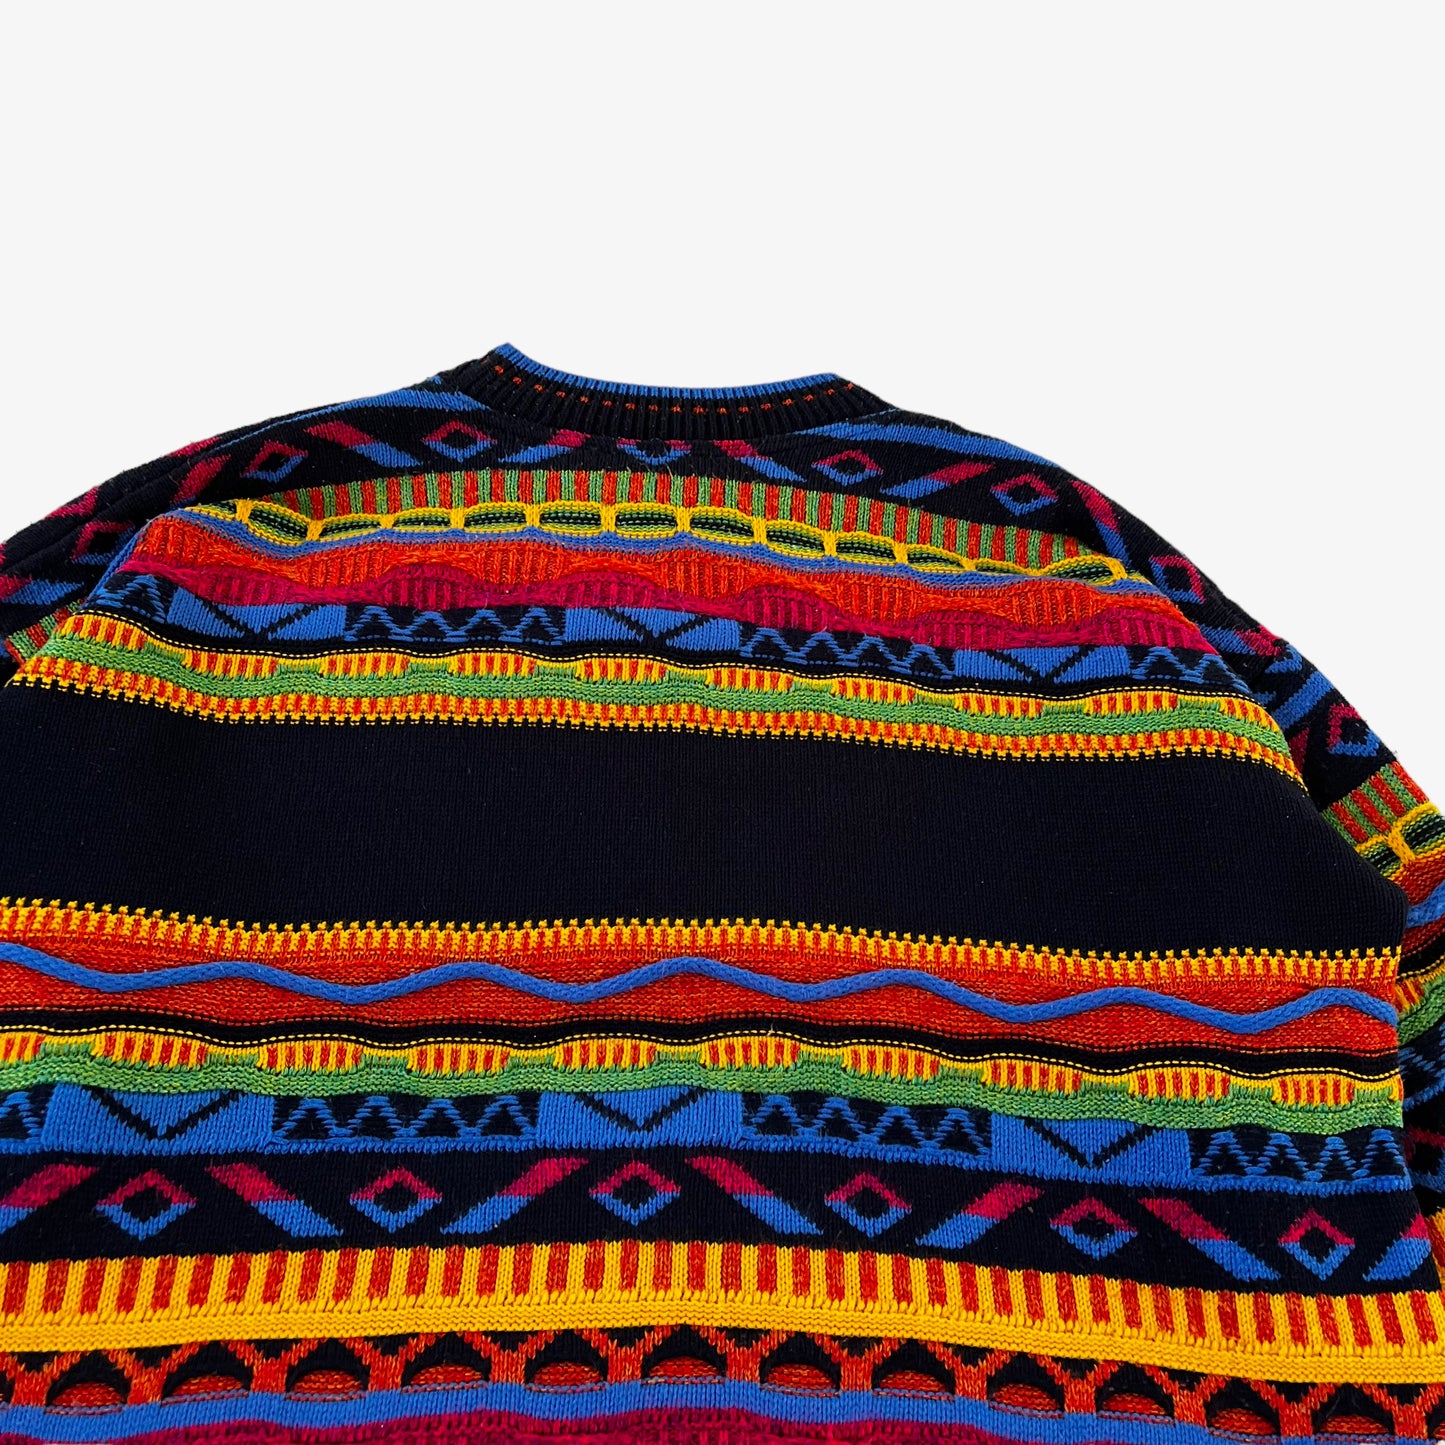 Vintage 90s The Sweater Shop 3D Textured Colourful Knitted Jumper Design - Casspios Dream